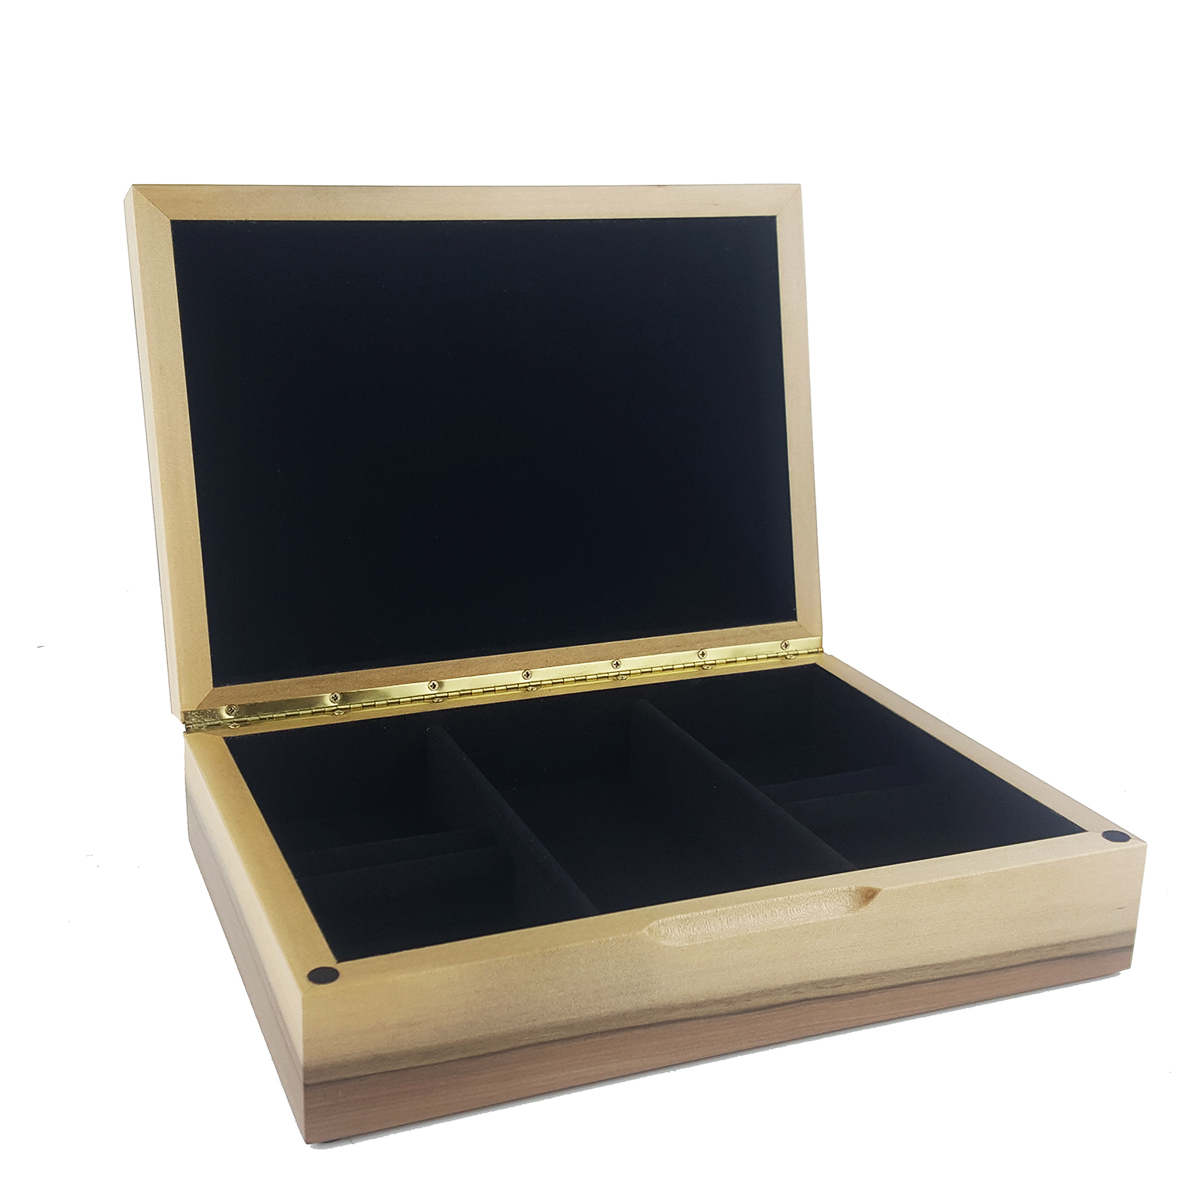 Tasmanian Sassafras Medium Jewellery Box Fitted with Dividers Large View